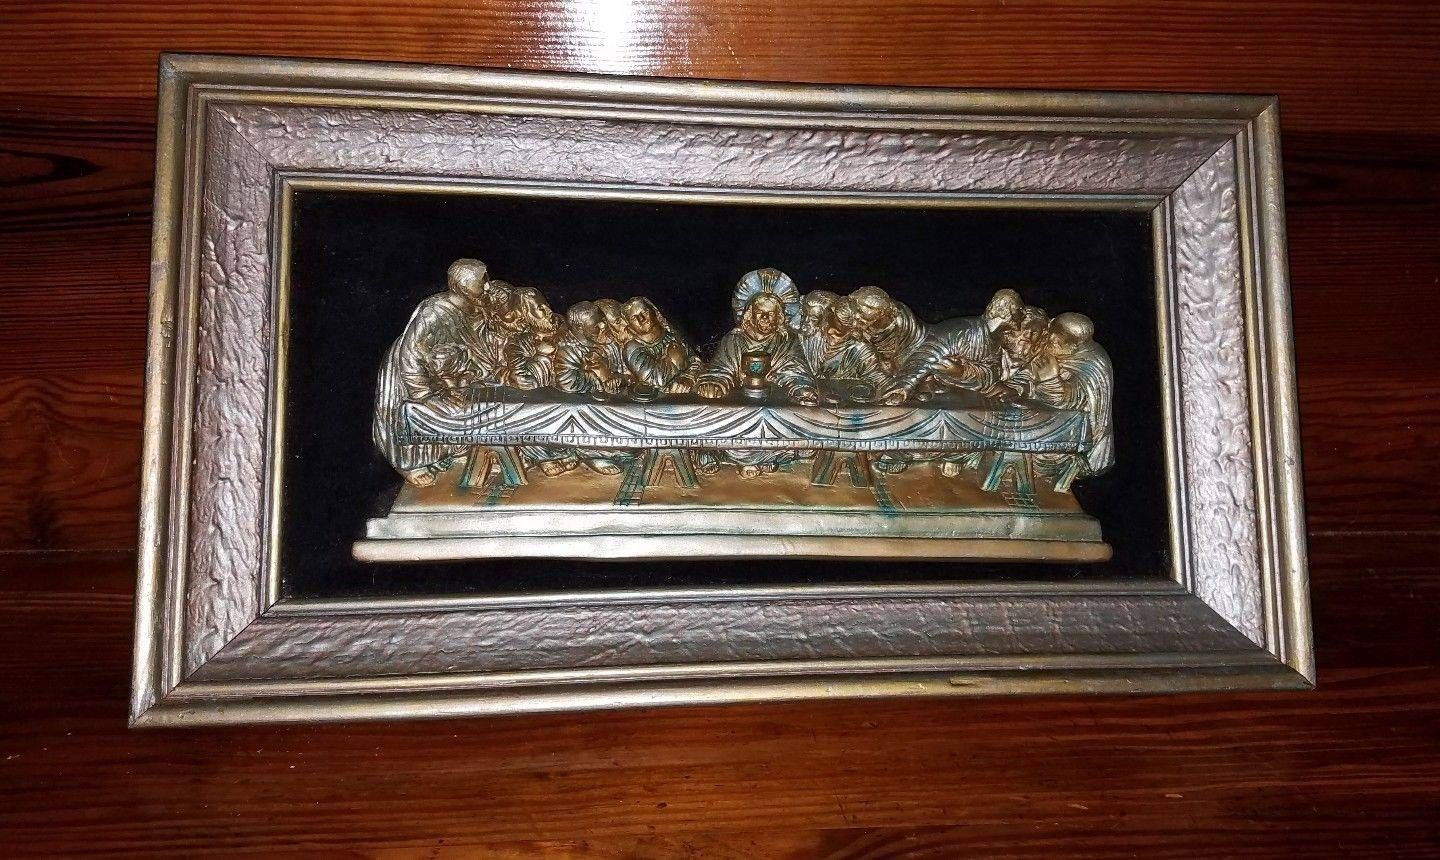 The Last Supper Framed 3d Wall Art | Ebay In Most Recent Last Supper Wall Art (View 16 of 20)